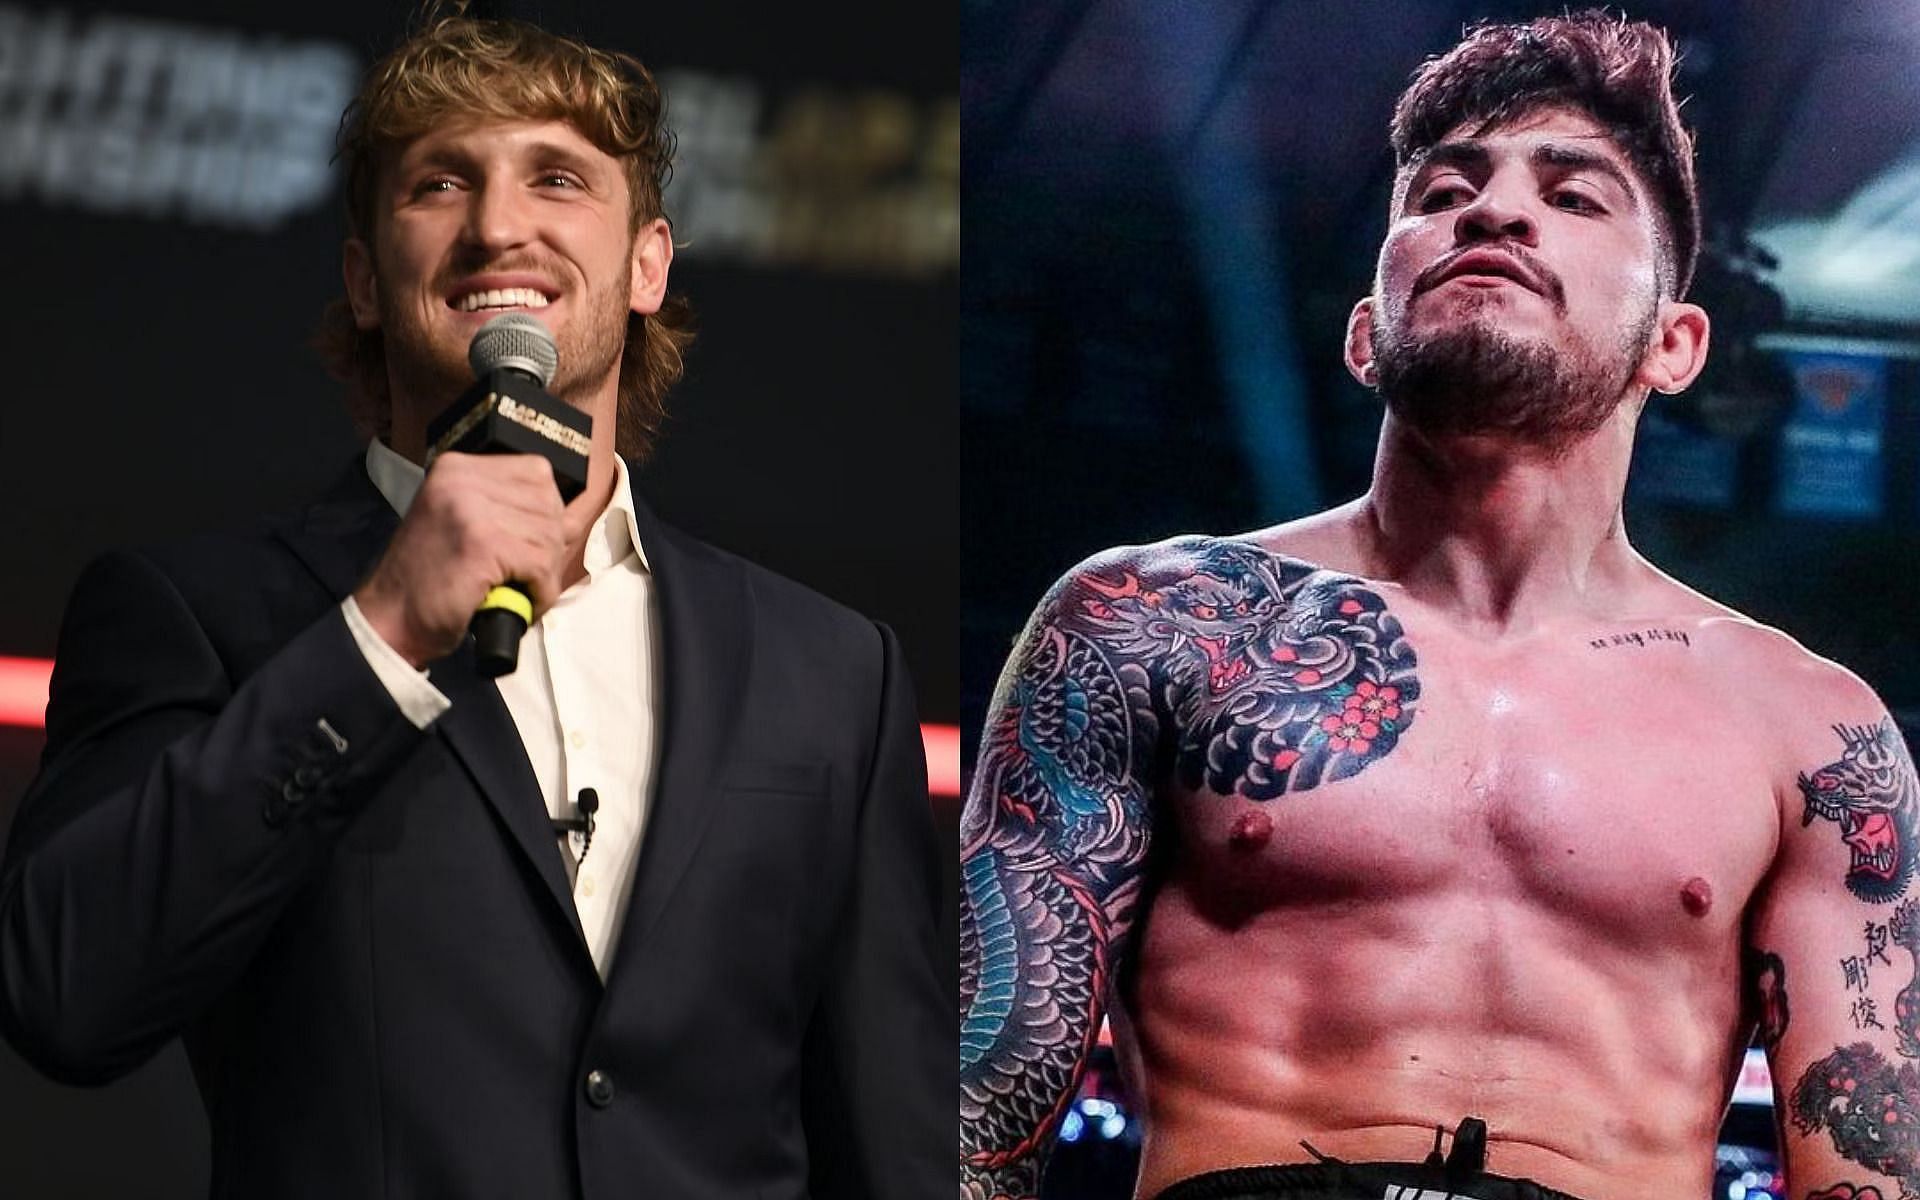 Logan Paul and Dillon Danis [Image credits: @dillondanis on Instagram and Getty Images]